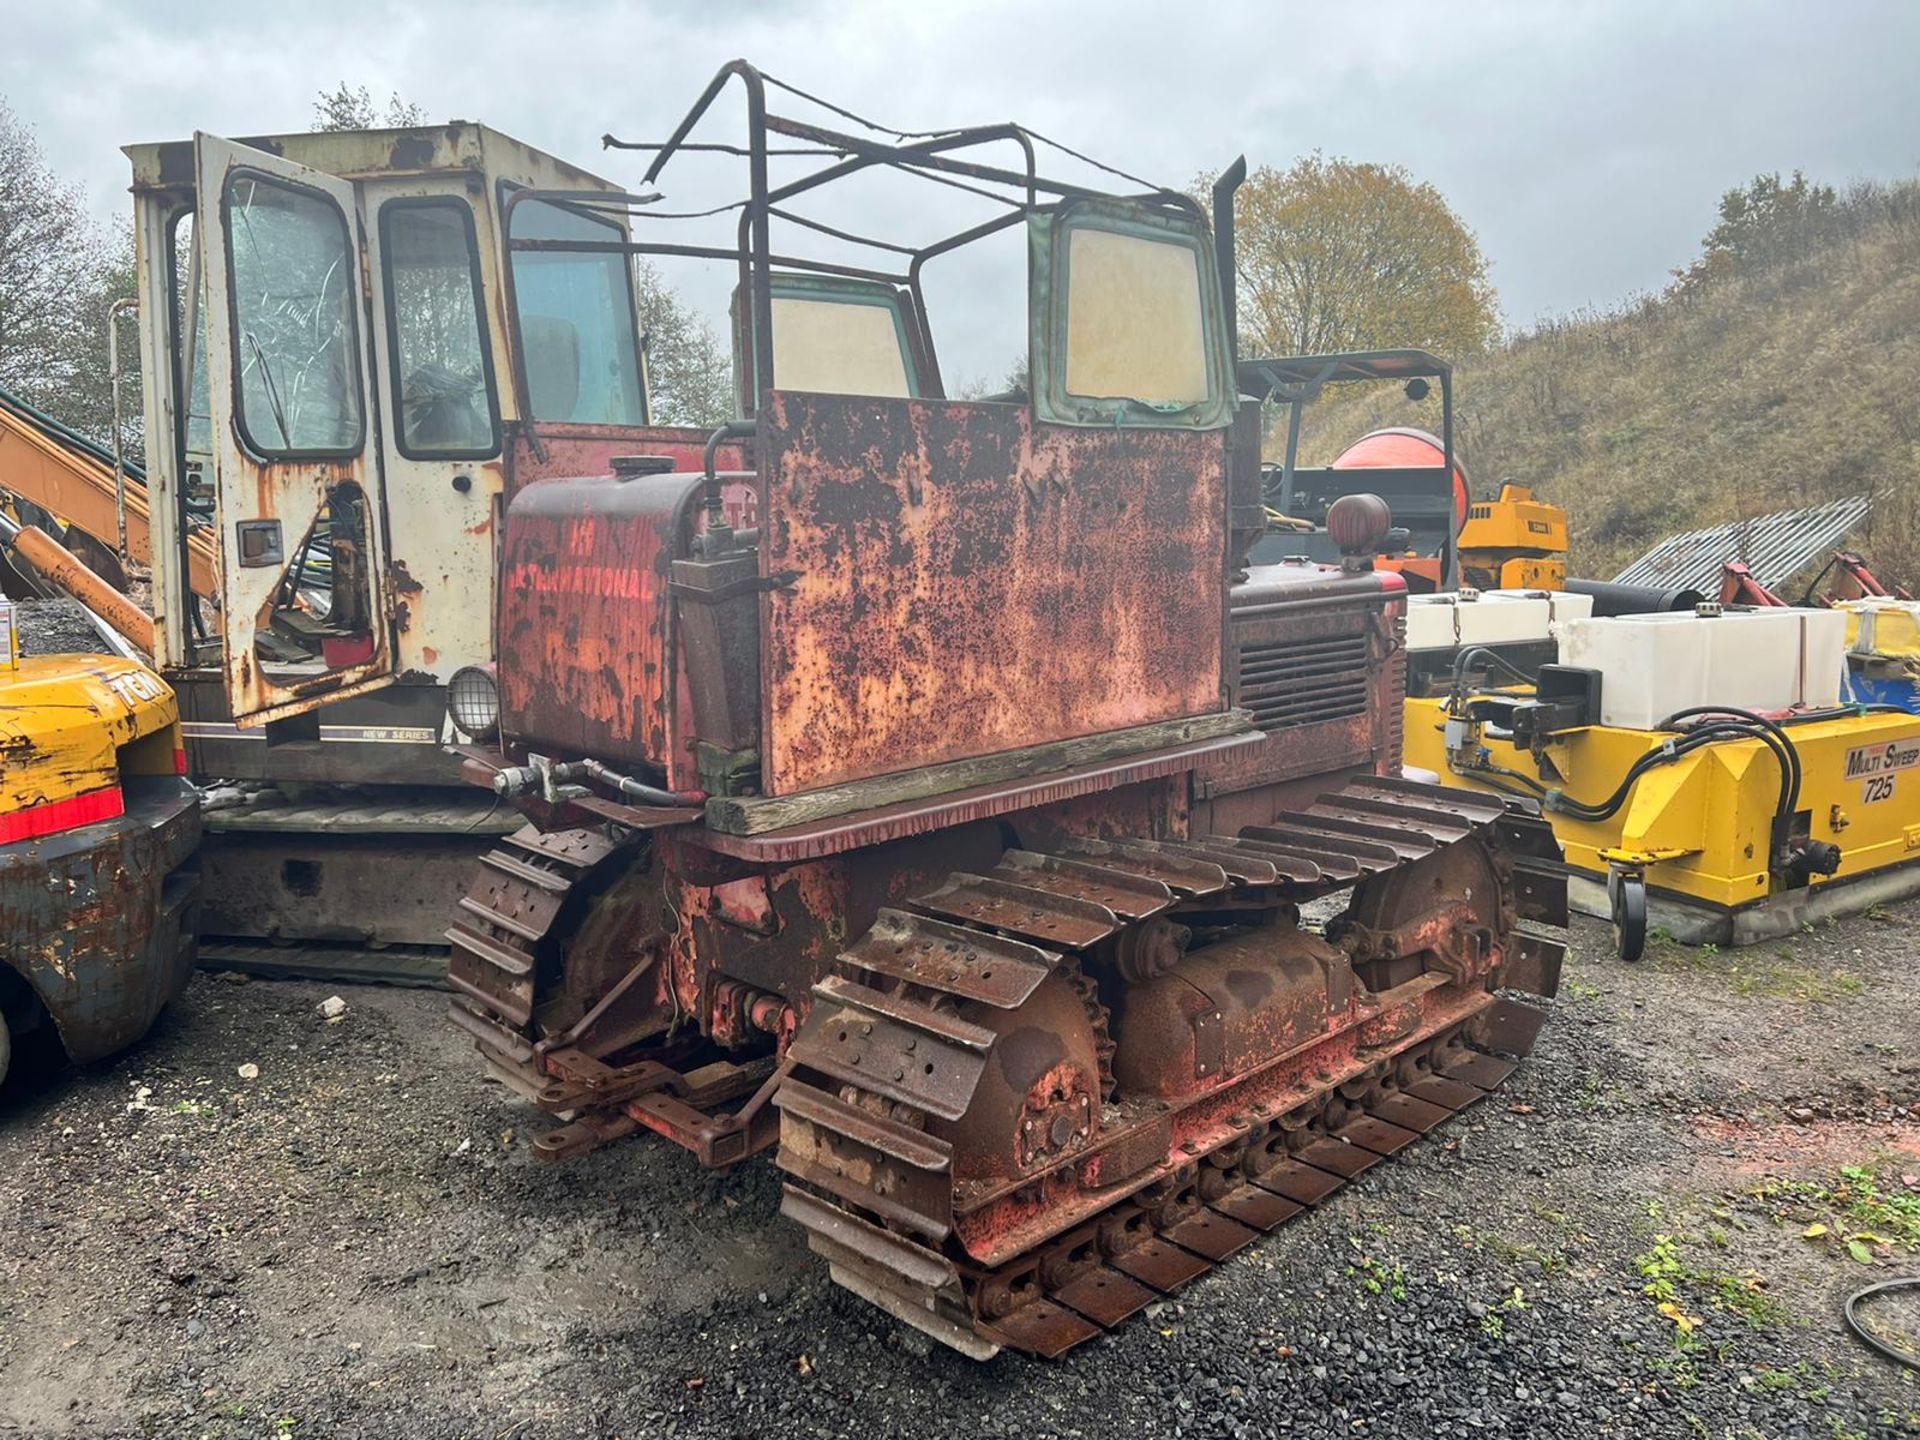 1955 INTERNATIONAL BTD6 39hp DIESEL TRACKED CRAWLER TRACTOR, RUNS AND DRIVES *PLUS VAT* - Image 4 of 10